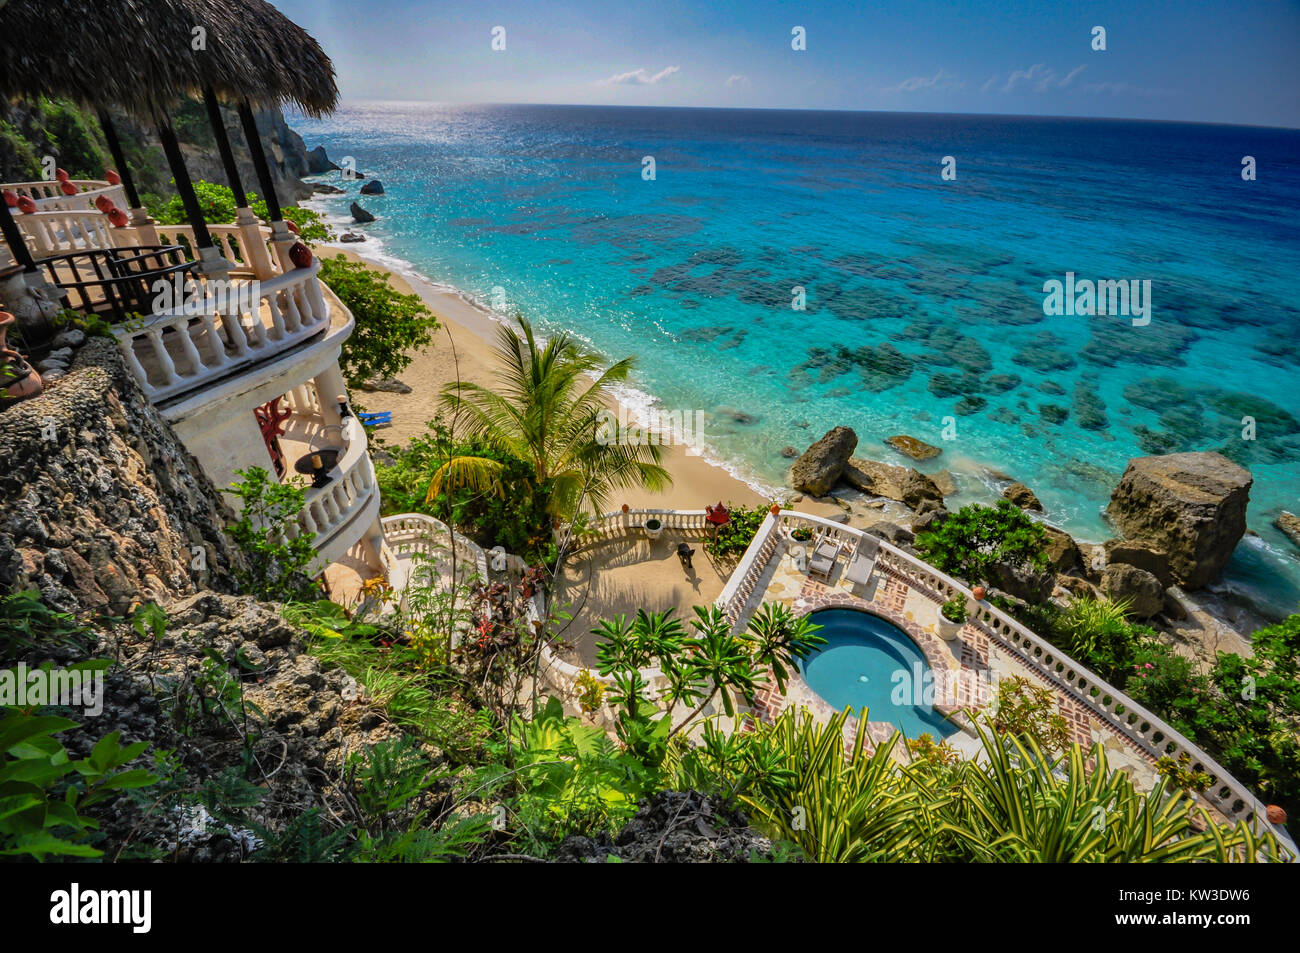 Stunning aerial ocean view of balconies, round pool, and clear ocean at a Caribbean resort. Stock Photo